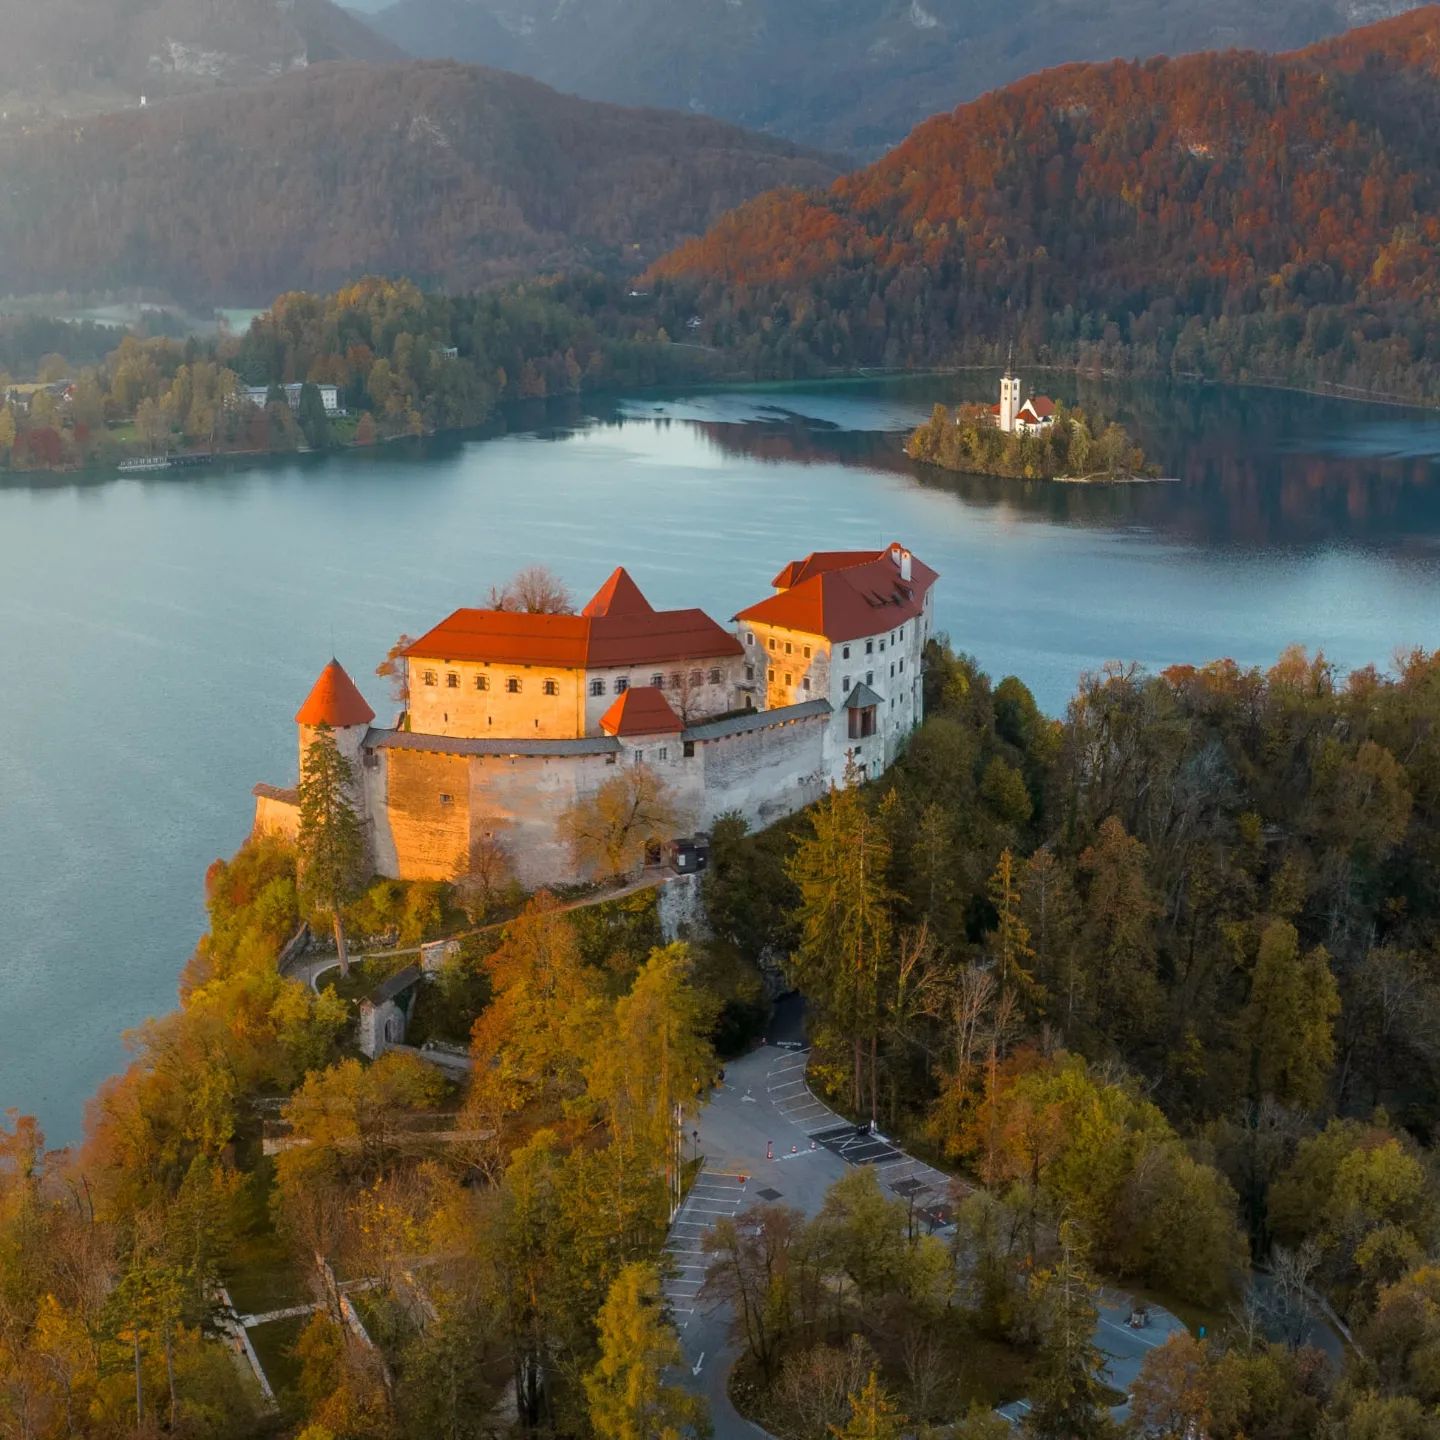 Bled castle with lake and island - Triglav National Park